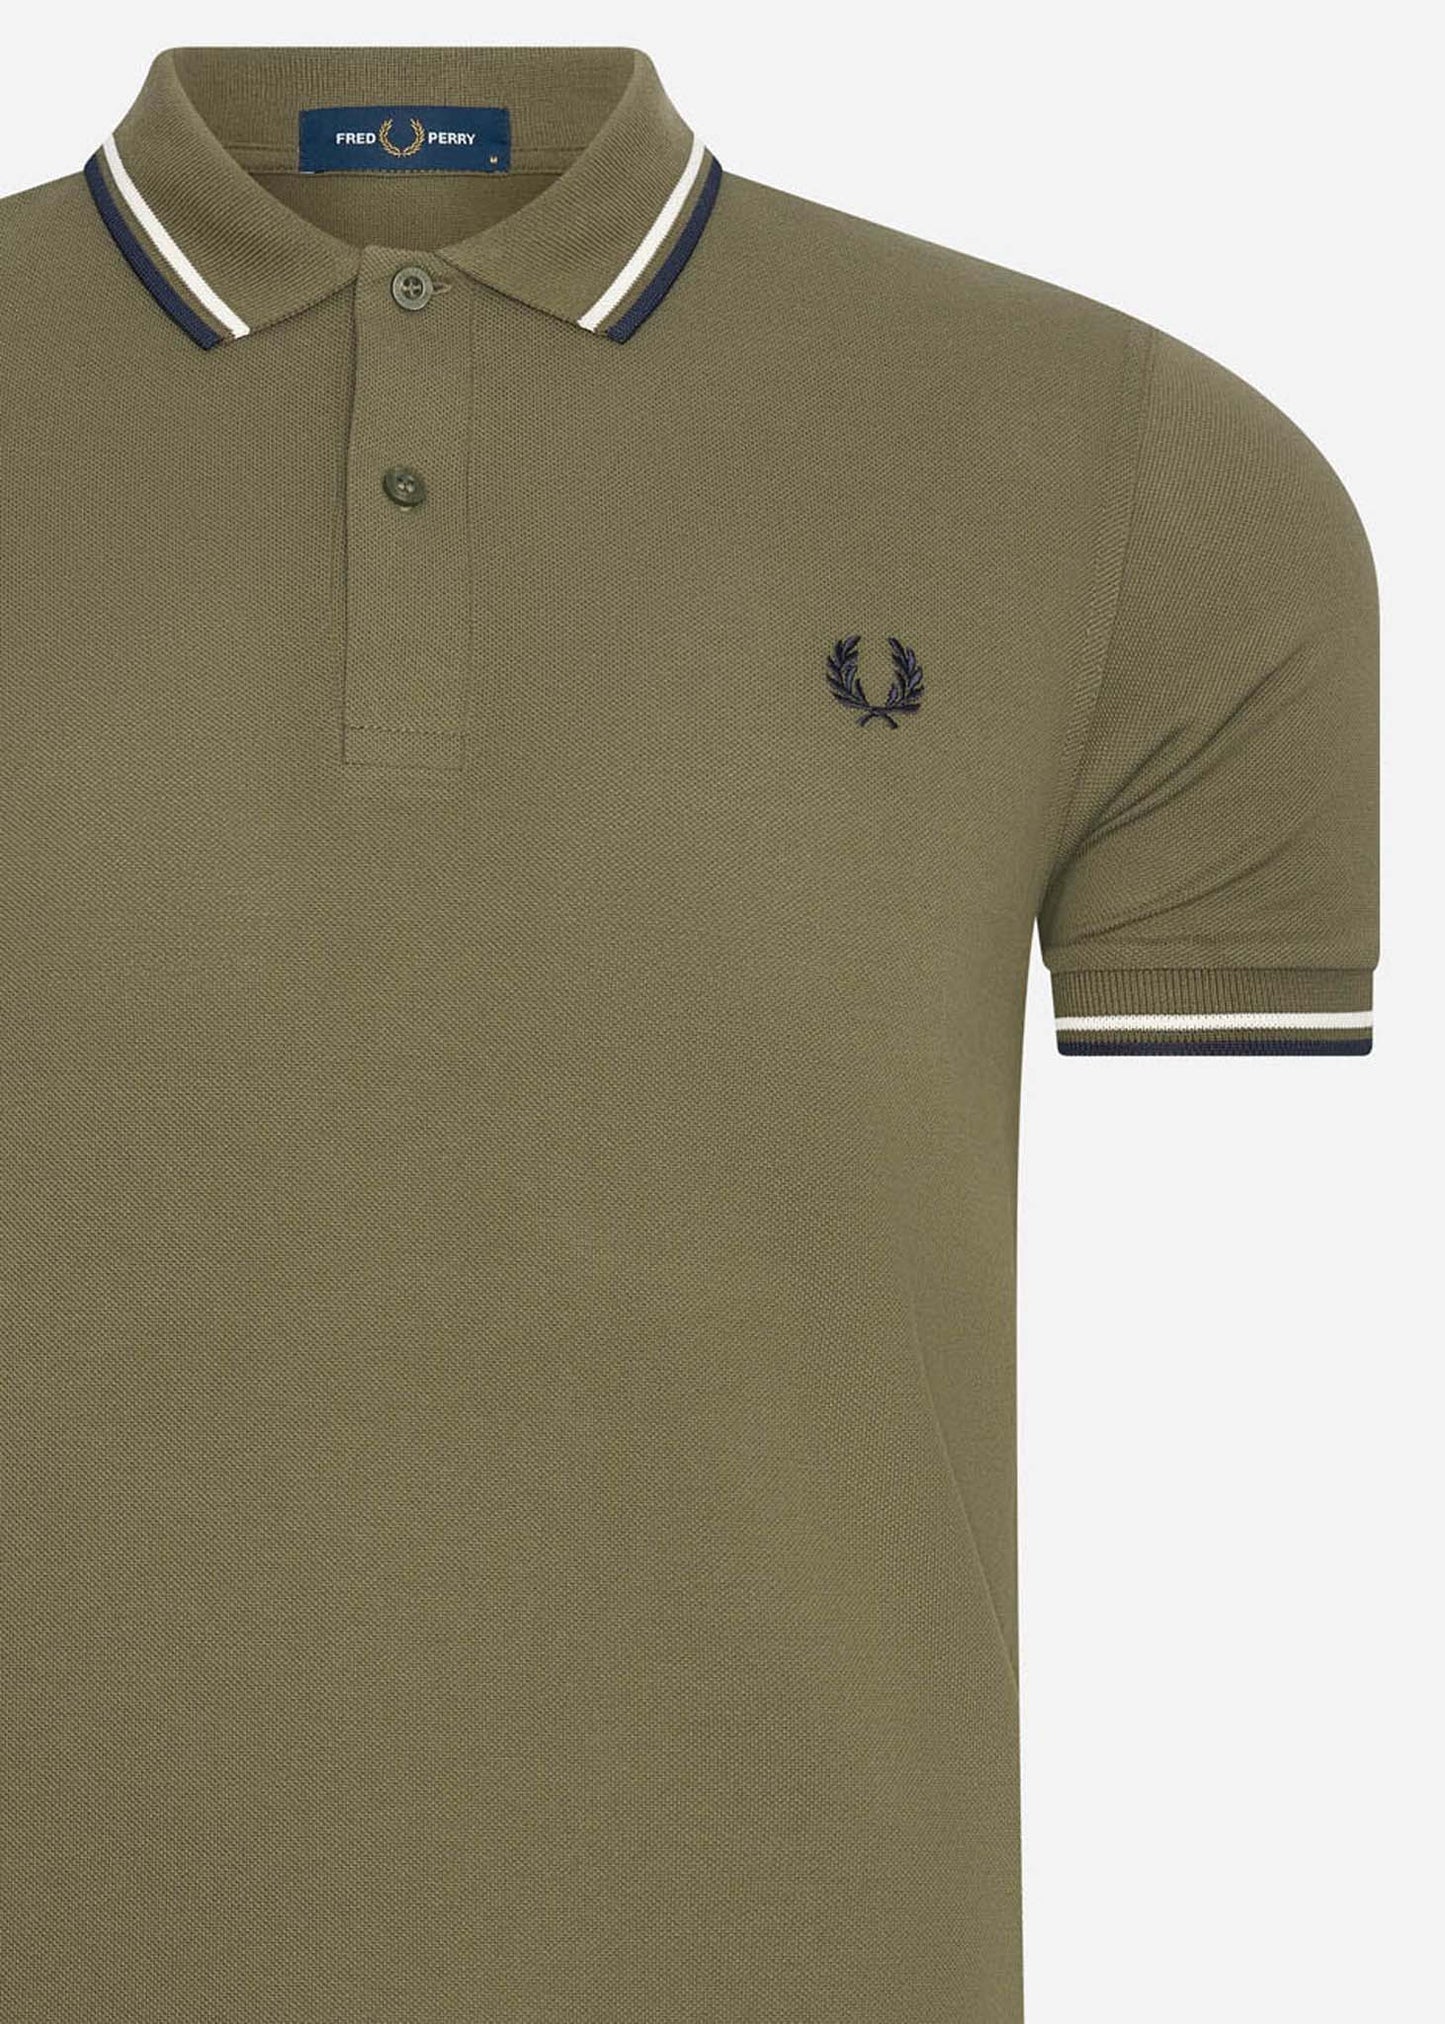 Twin tipped fred perry shirt - military green